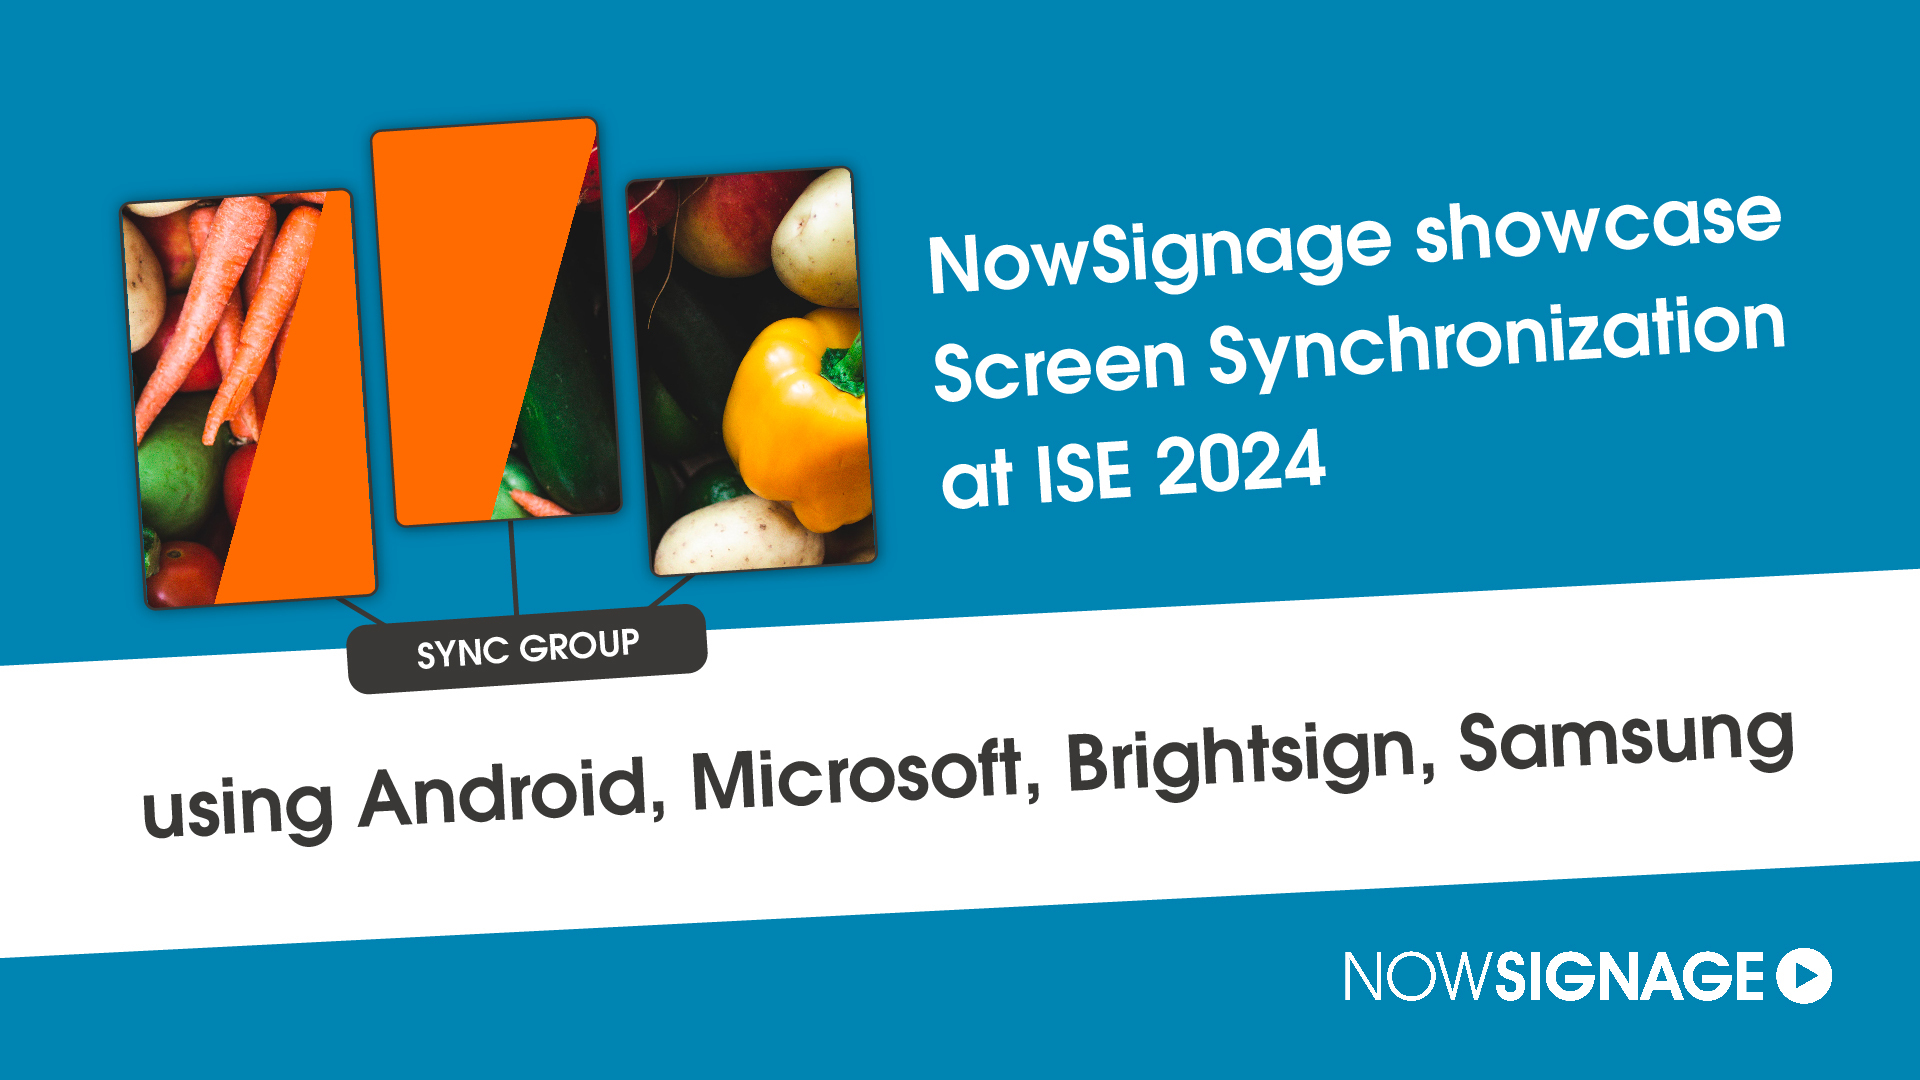 NowSignage showcase screen synchronization at ISE 2024 using Android, Microsoft, Brightsign, Samsung